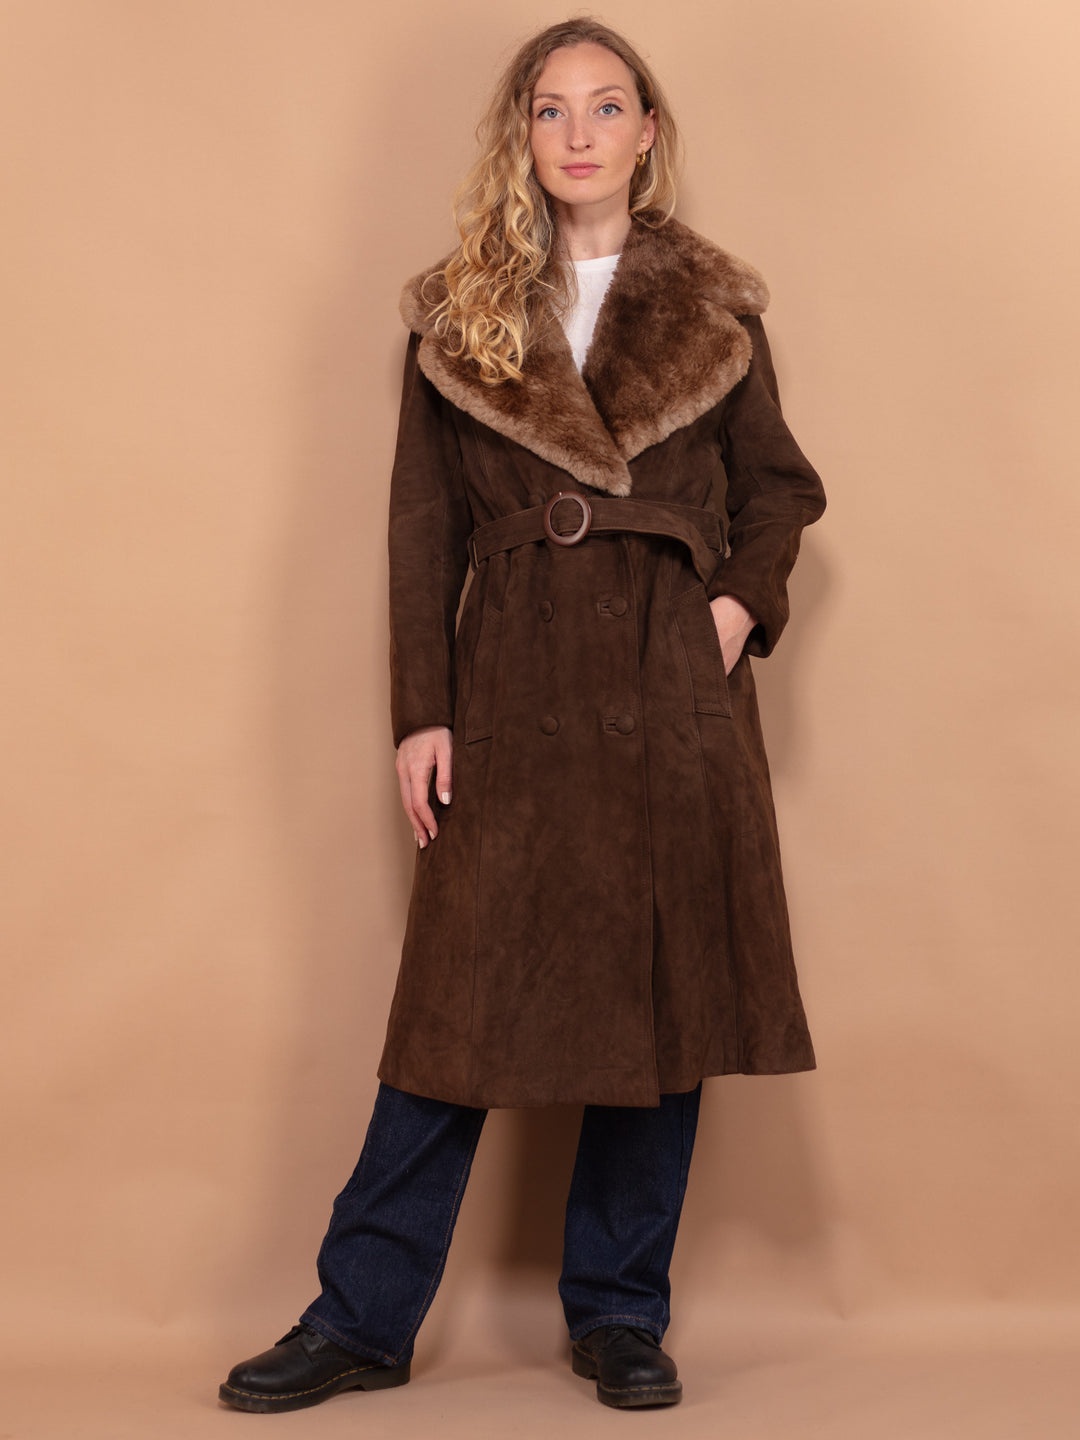 Suede Long Coat 70s, Size Small, Genuine Suede Coat, Shearling Trim Coat, Hippie Boho Coat, Vintage Sustainable Clothing, Made In England